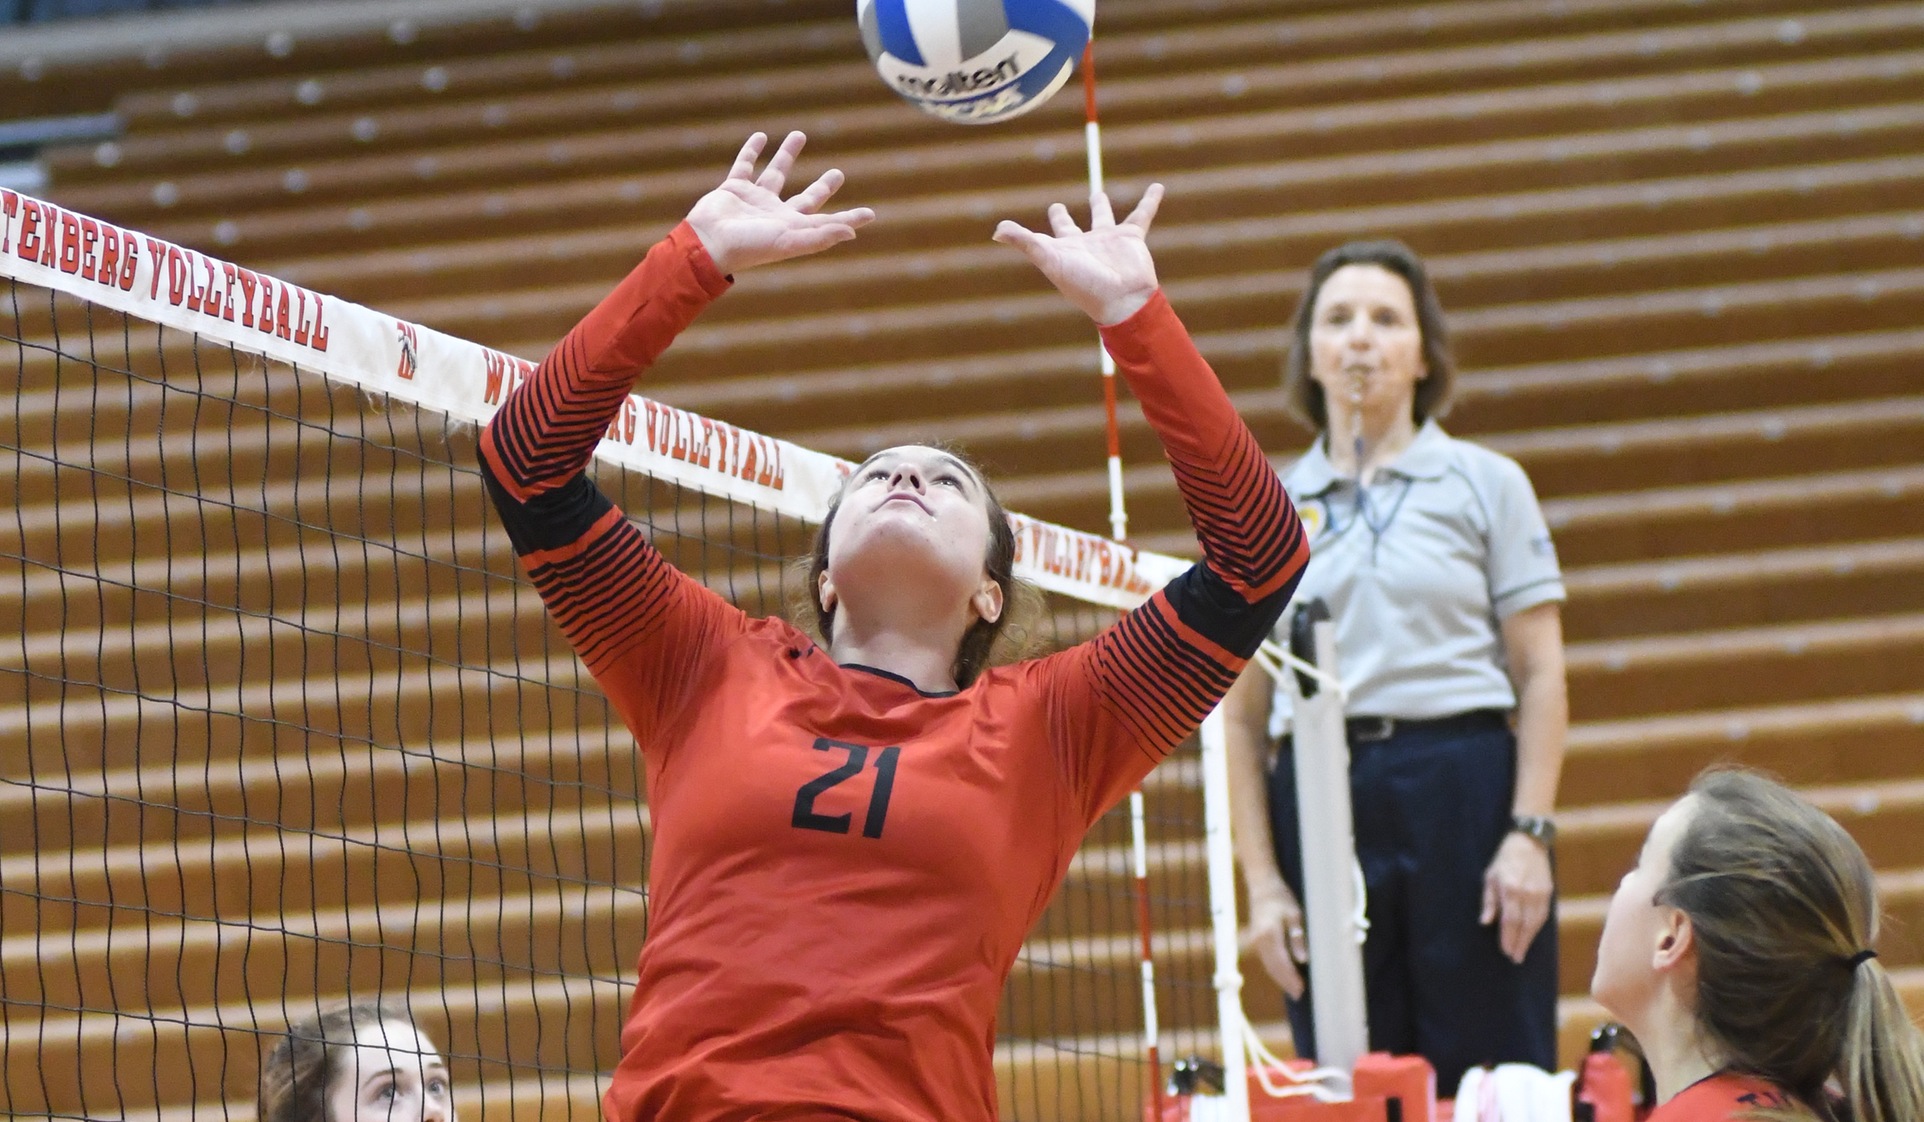 Fourth-ranked Wittenberg cruised to a 3-0 win over Otterbein in the season opener thanks to a 30-assist performance from senior setter Karen Wildemann.